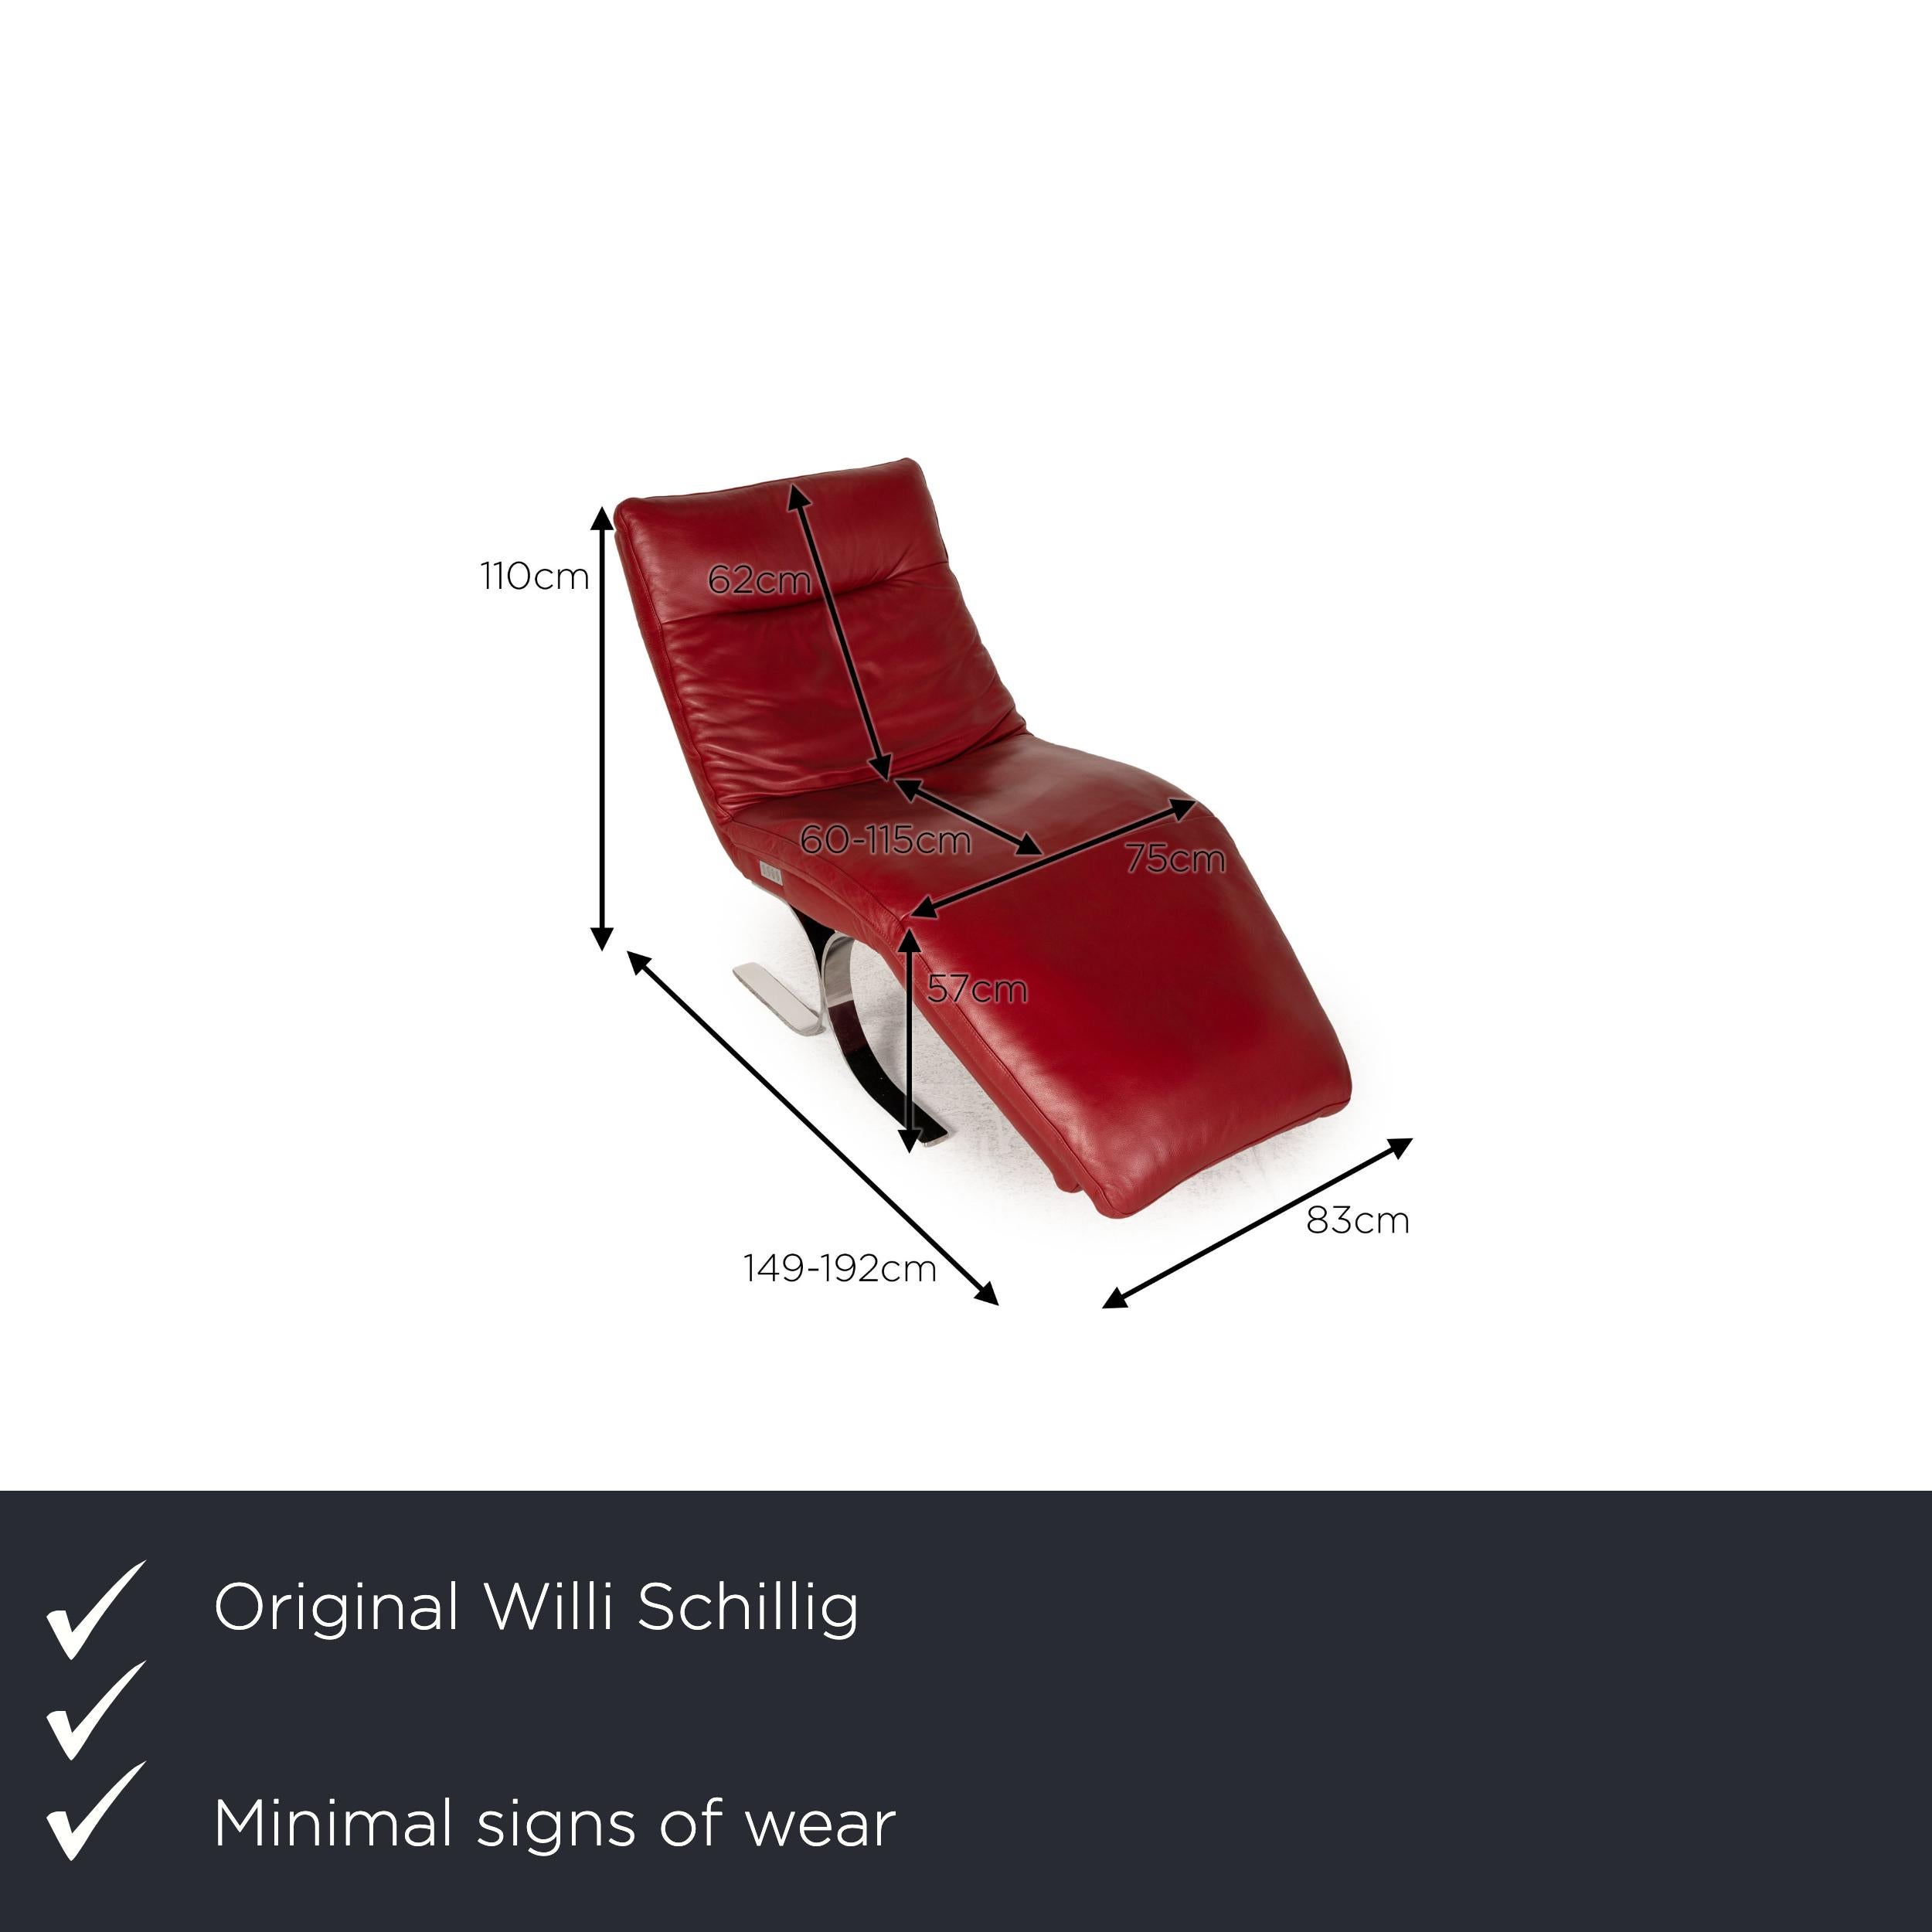 We present to you a Willi Schillig Daily Dreams leather lounger red function relaxation function.


Product measurements in centimeters:

depth: 149
width: 83
height: 110
seat height: 57
rest height: 
seat depth: 60
seat width: 75
back